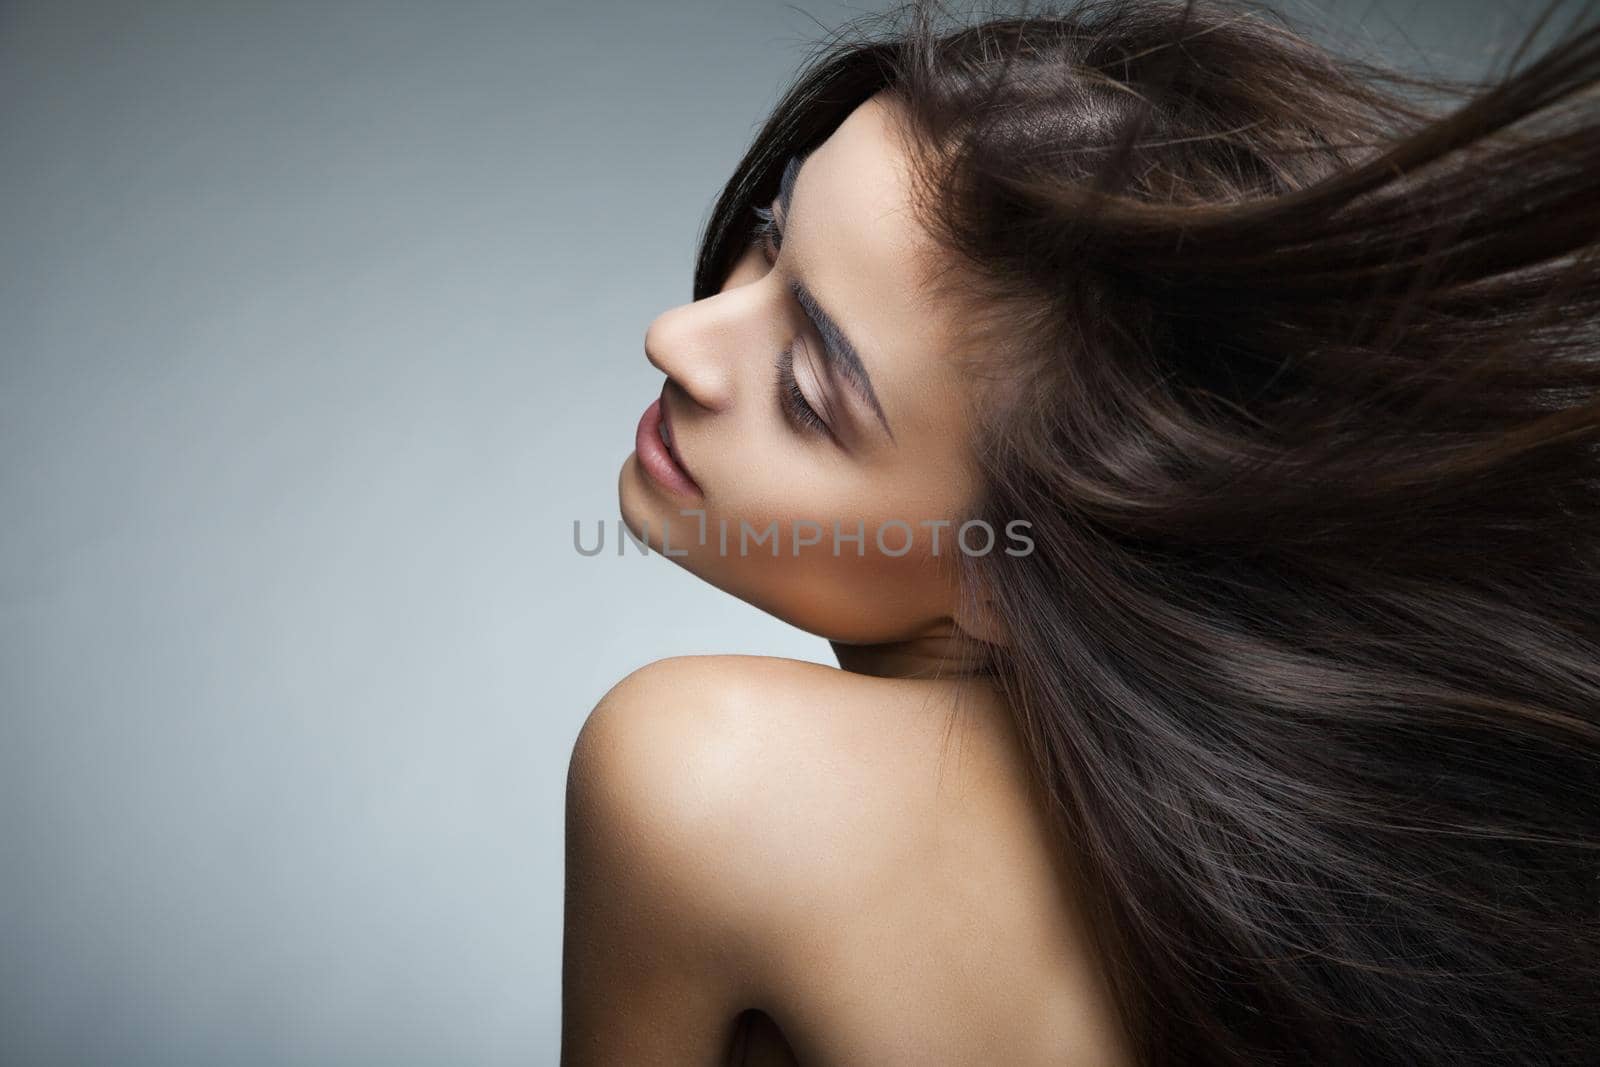 Attractive smiling woman with long hair on grey by Julenochek